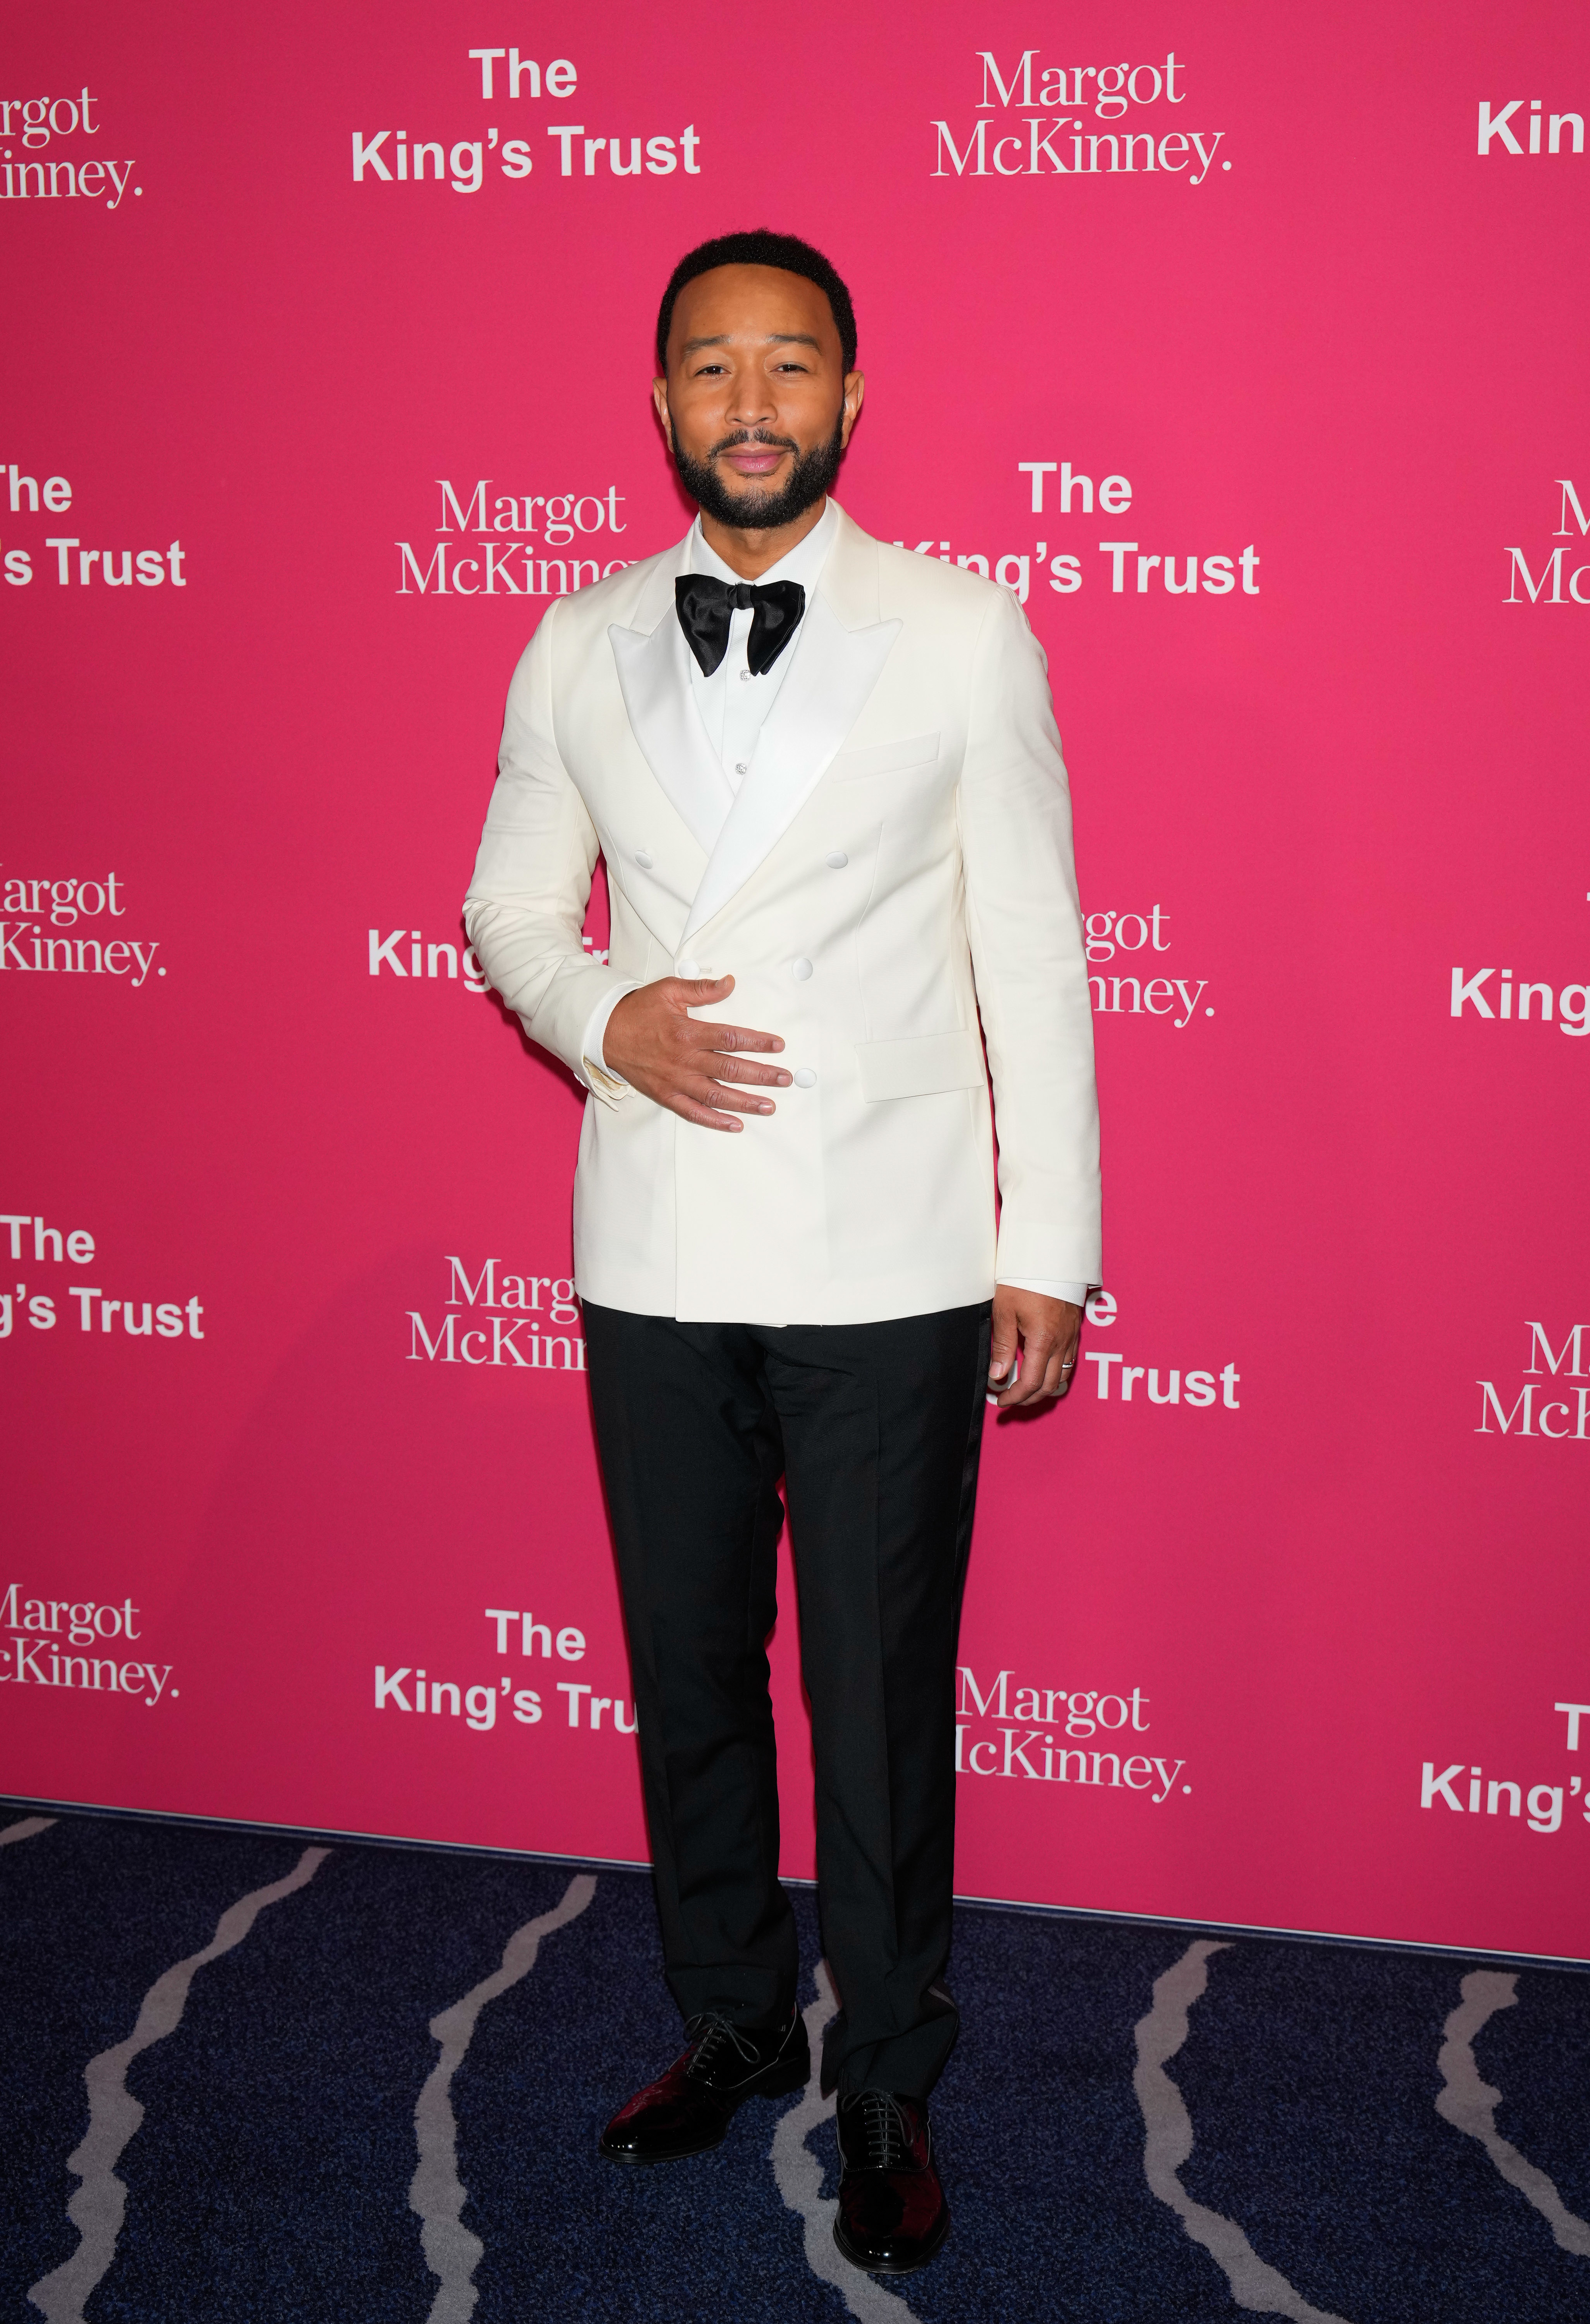 John Legend in a white tuxedo jacket and black bow tie poses at an event